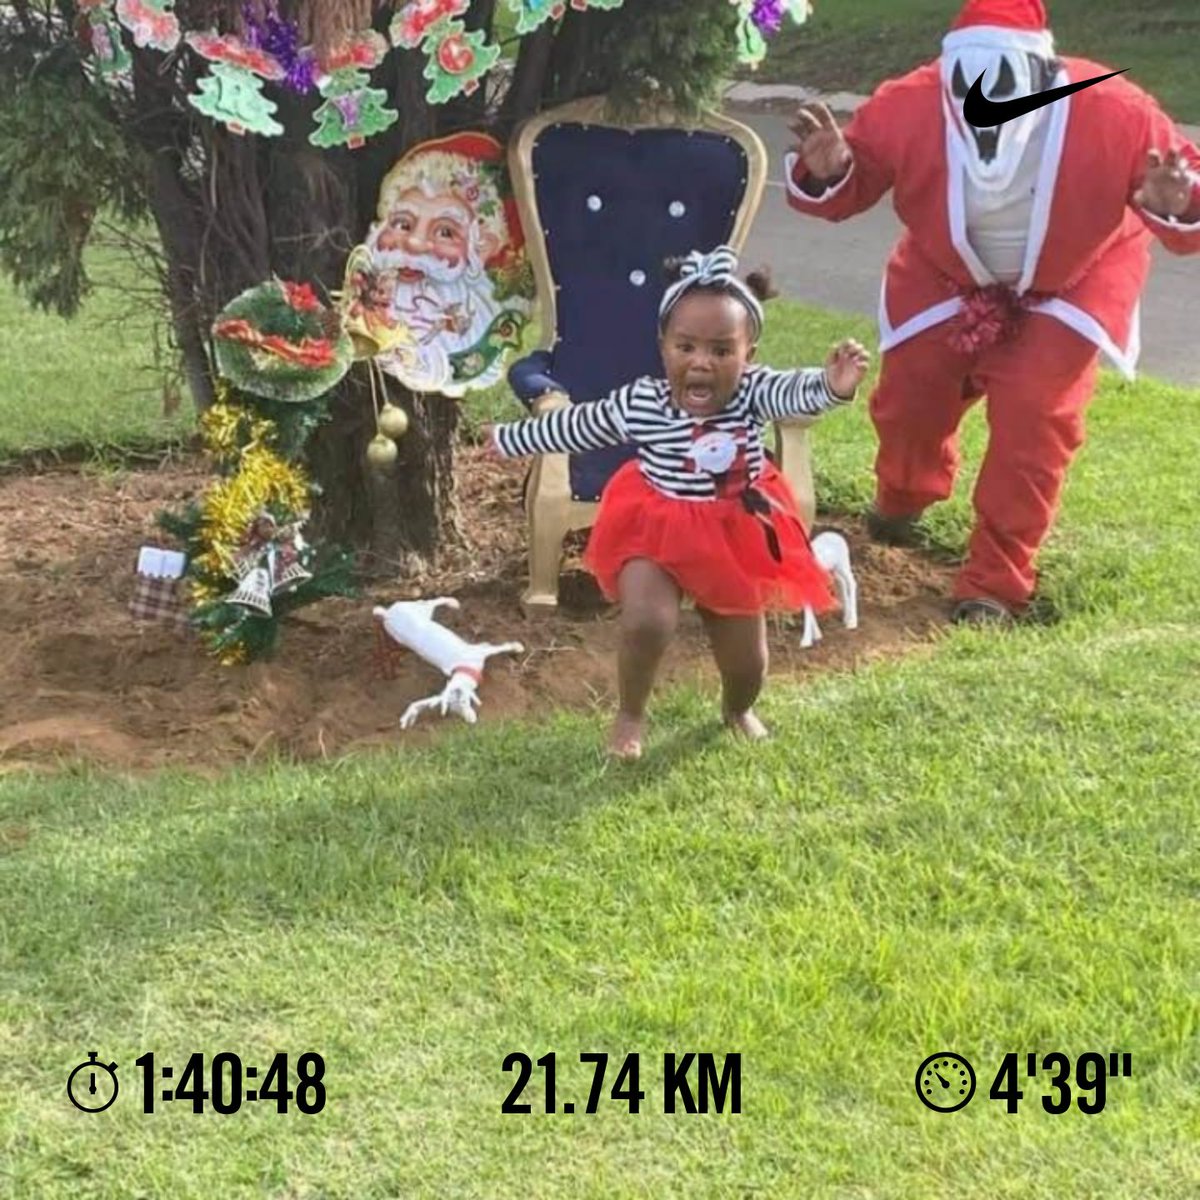 #RunningWithTumiSole 
#RunwithTbag4charity 
I wanted to do 35 then my stomach started turning like a tornado 😂🤣

#RunwithTbag4charity